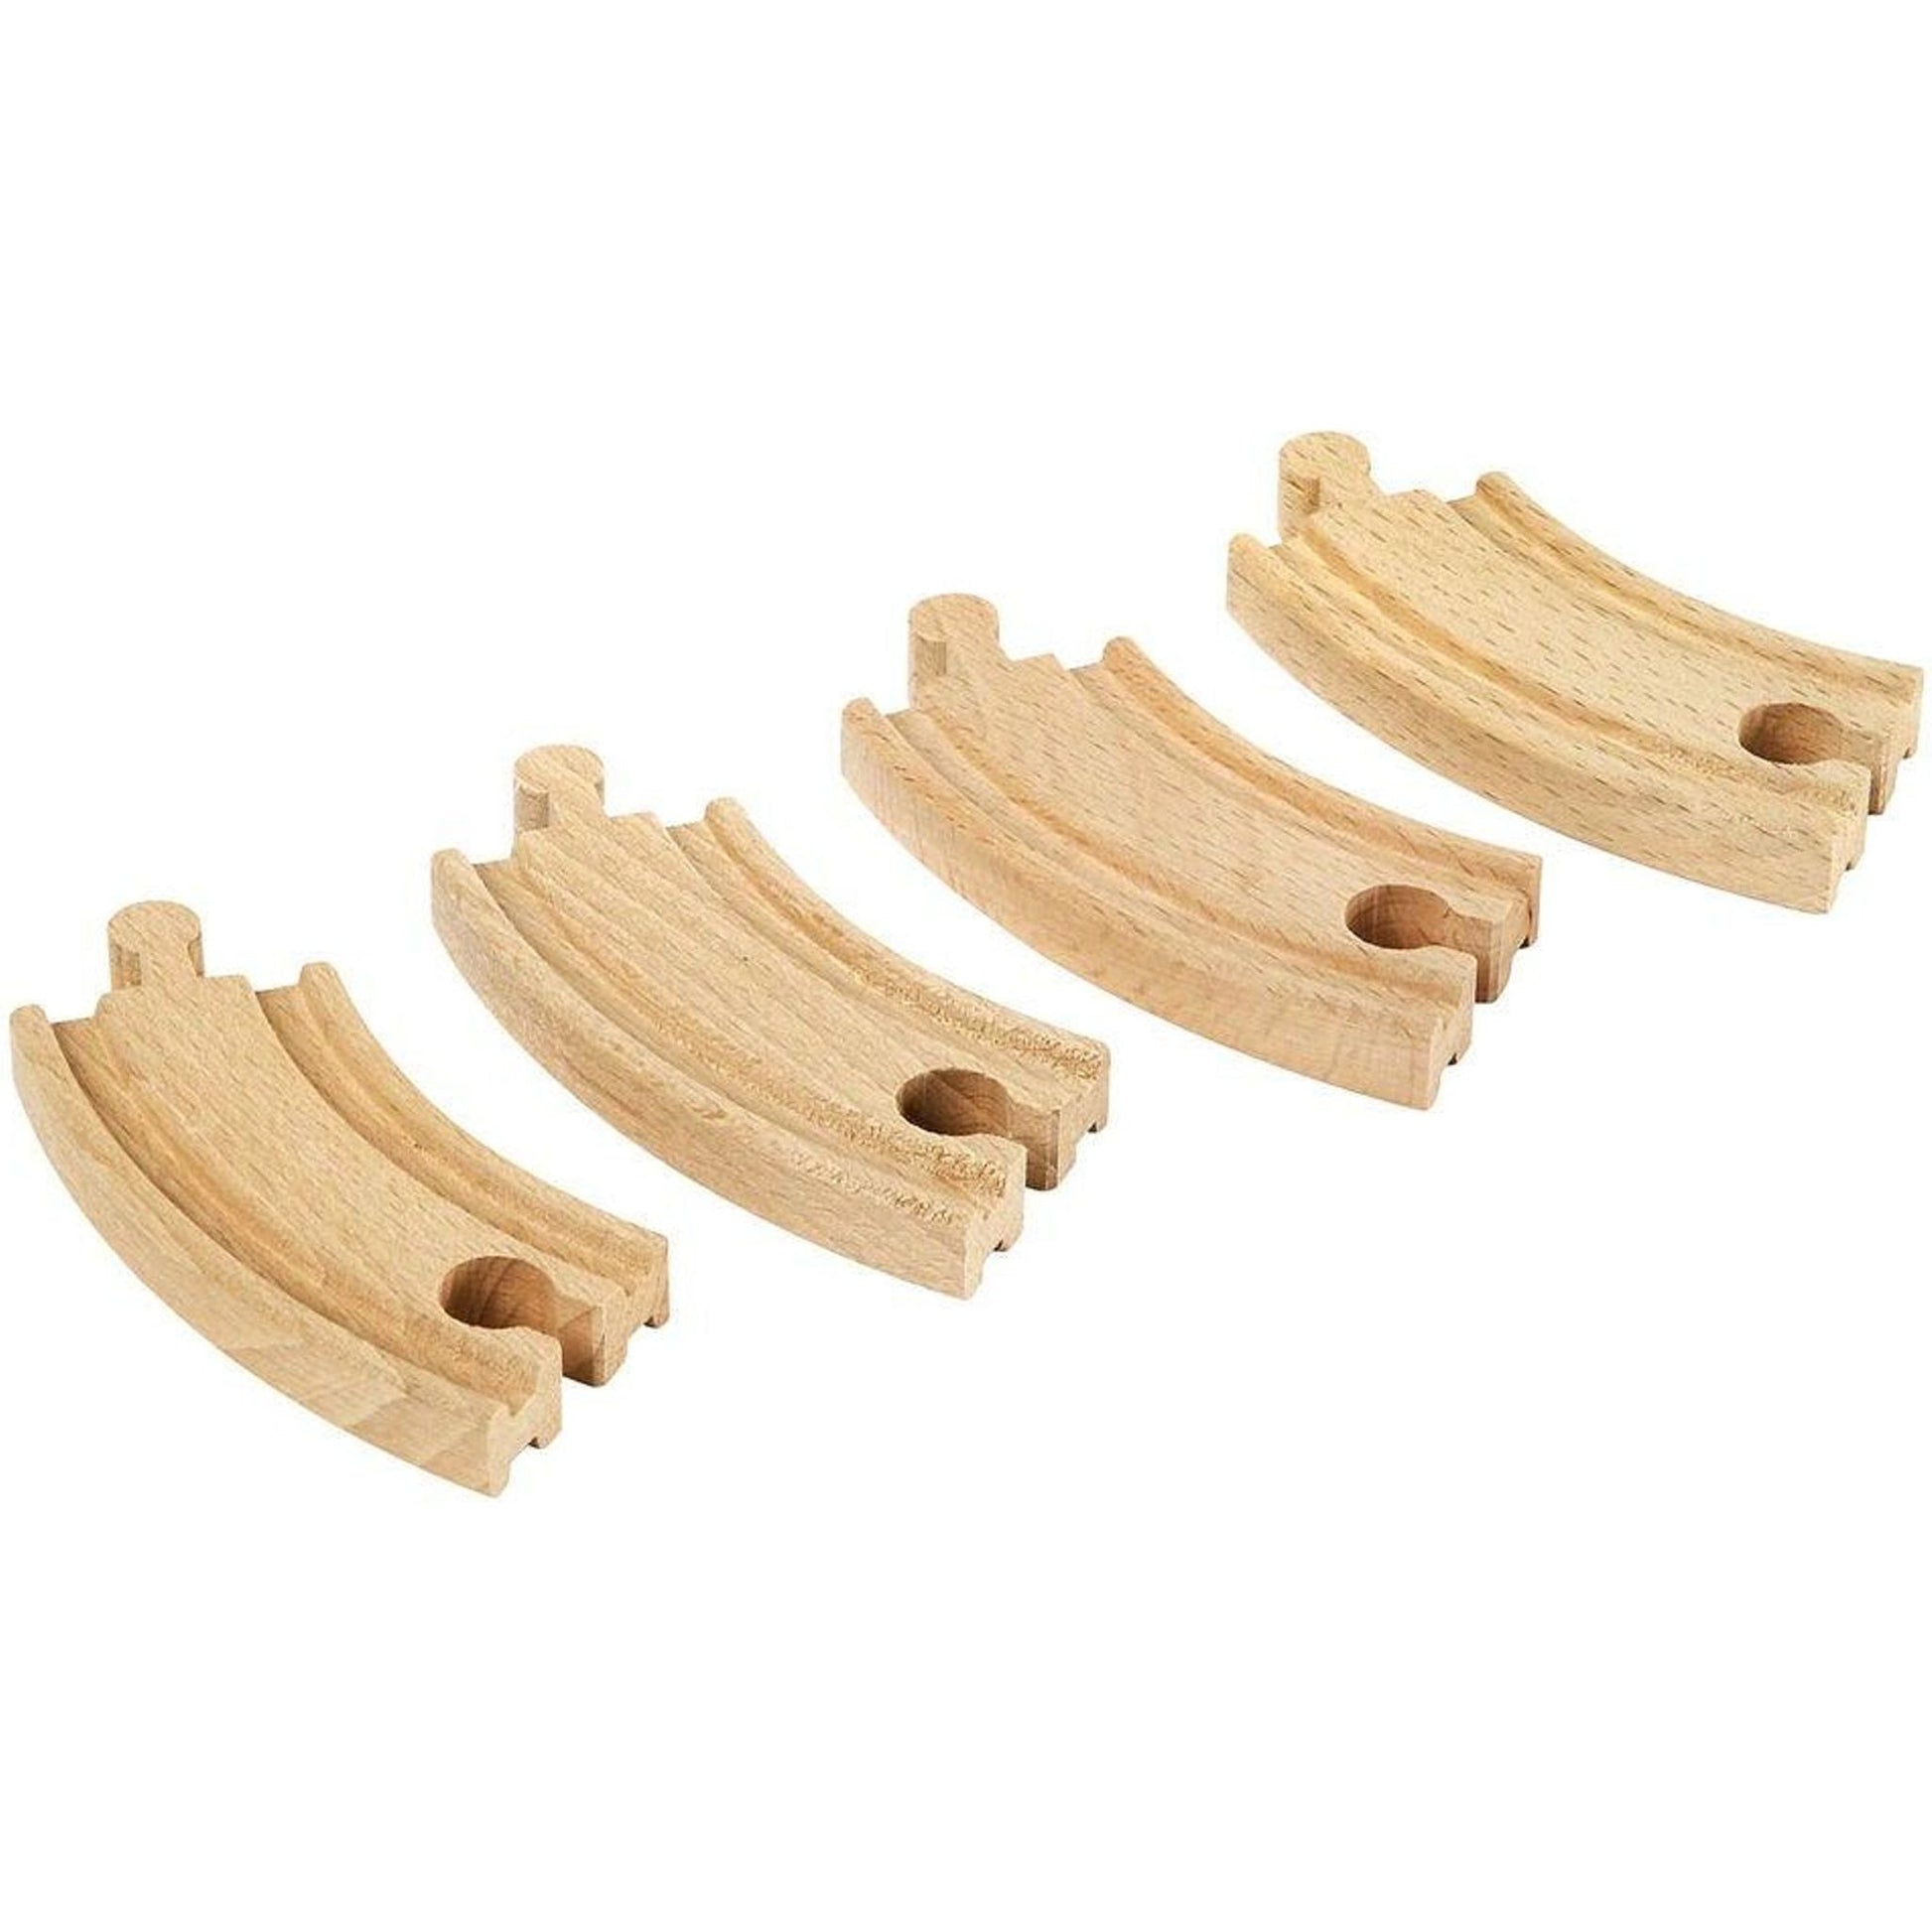 Tracks - Short Curved Tracks 4 pieces - Toybox Tales